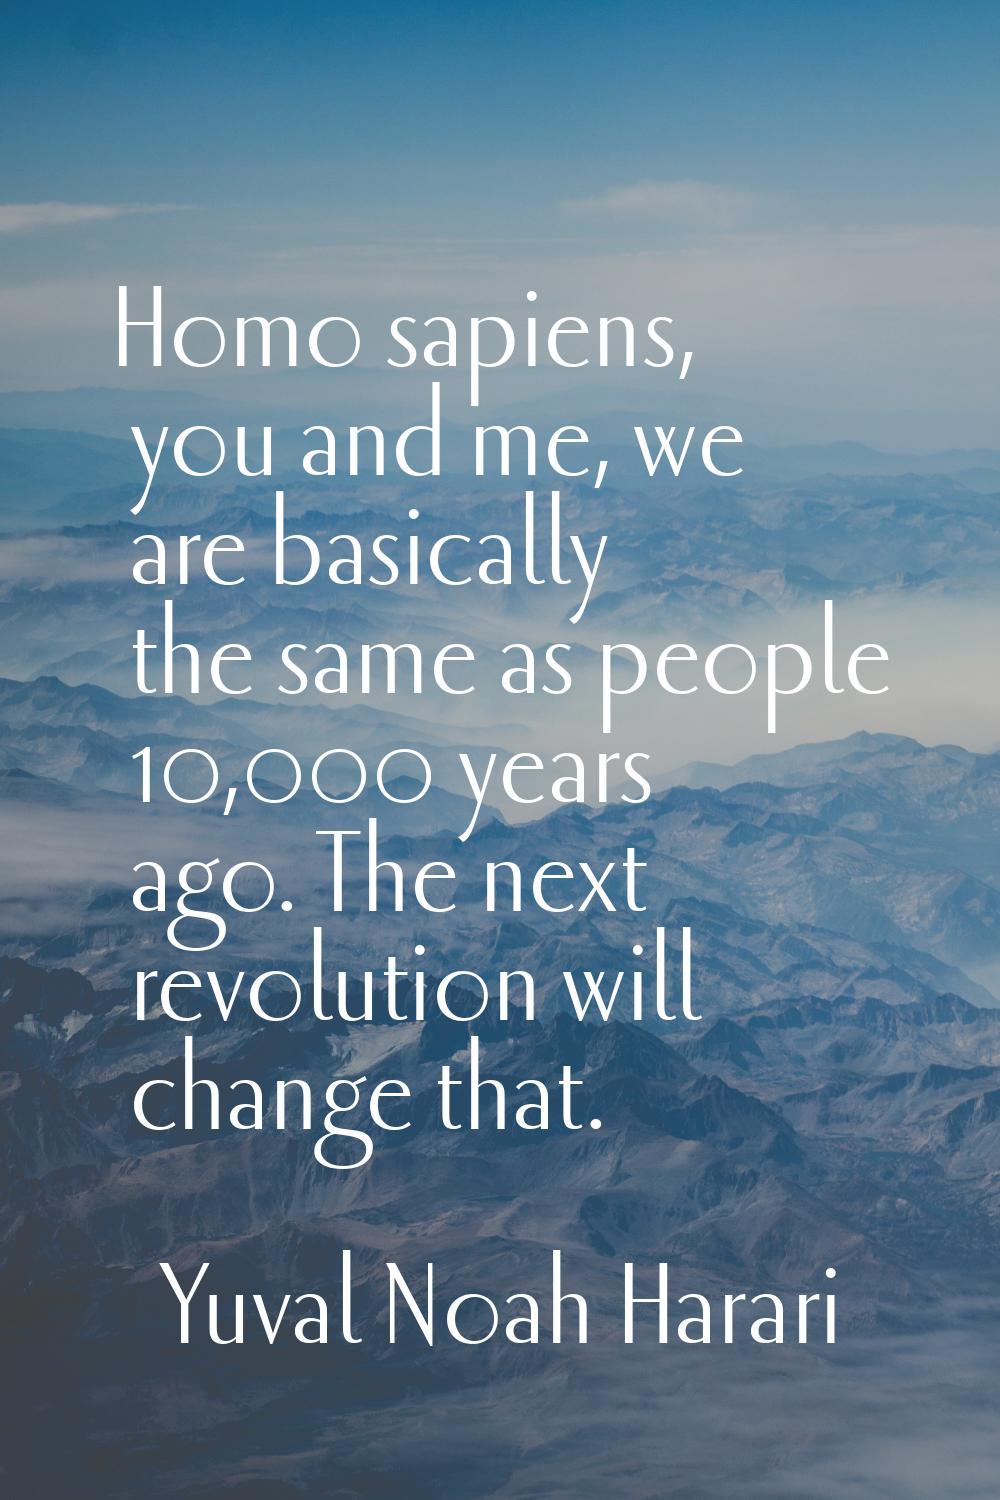 Homo sapiens, you and me, we are basically the same as people 10,000 years ago. The next revolution